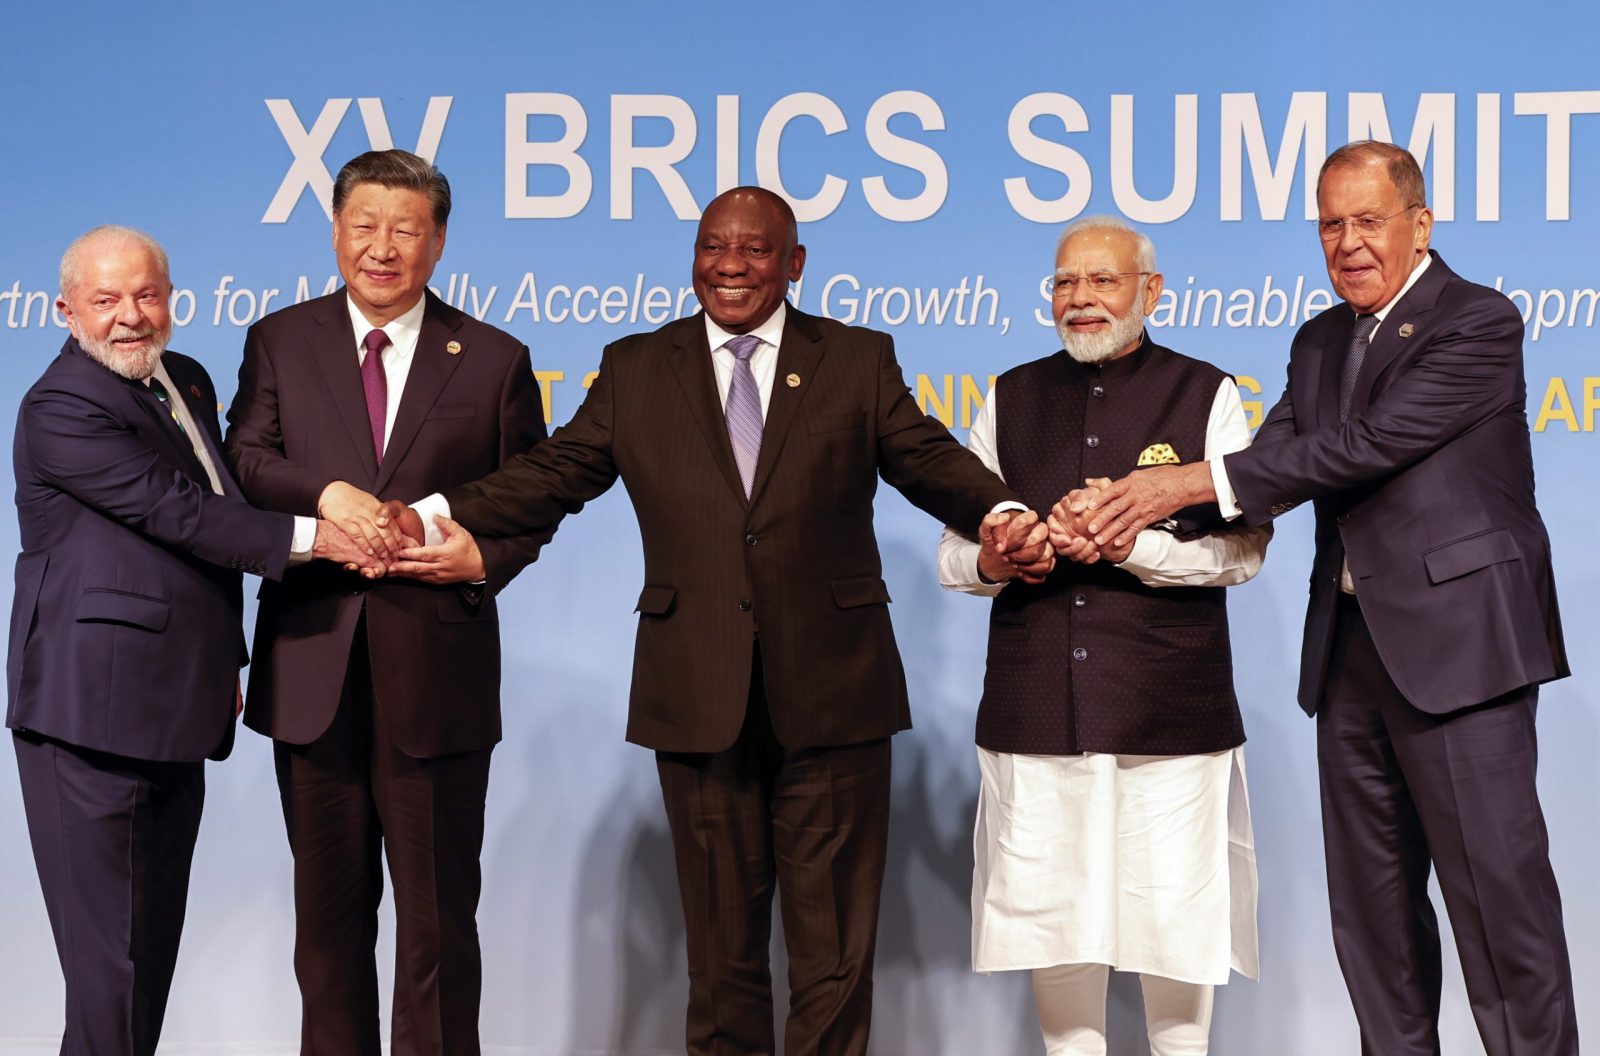 epa10815047 (L-R) President of Brazil Luiz Inacio Lula da Silva, President of China Xi Jinping, South African President Cyril Ramaphosa, Prime Minister of India Narendra Modi and Russia's Foreign Minister Sergei Lavrov pose for a BRICS family photo during the 2023 BRICS Summit at the Sandton Convention Centre in Johannesburg, South Africa, 23 August 2023. South Africa is hosting the 15th BRICS Summit, (Brazil, Russia, India, China and South Africa), as the group’s economies account for a quarter of global gross domestic product. Dozens of leaders of other countries in Africa, Asia and the Middle East are also attending the summit.  EPA/GIANLUIGI GUERCIA / POOL